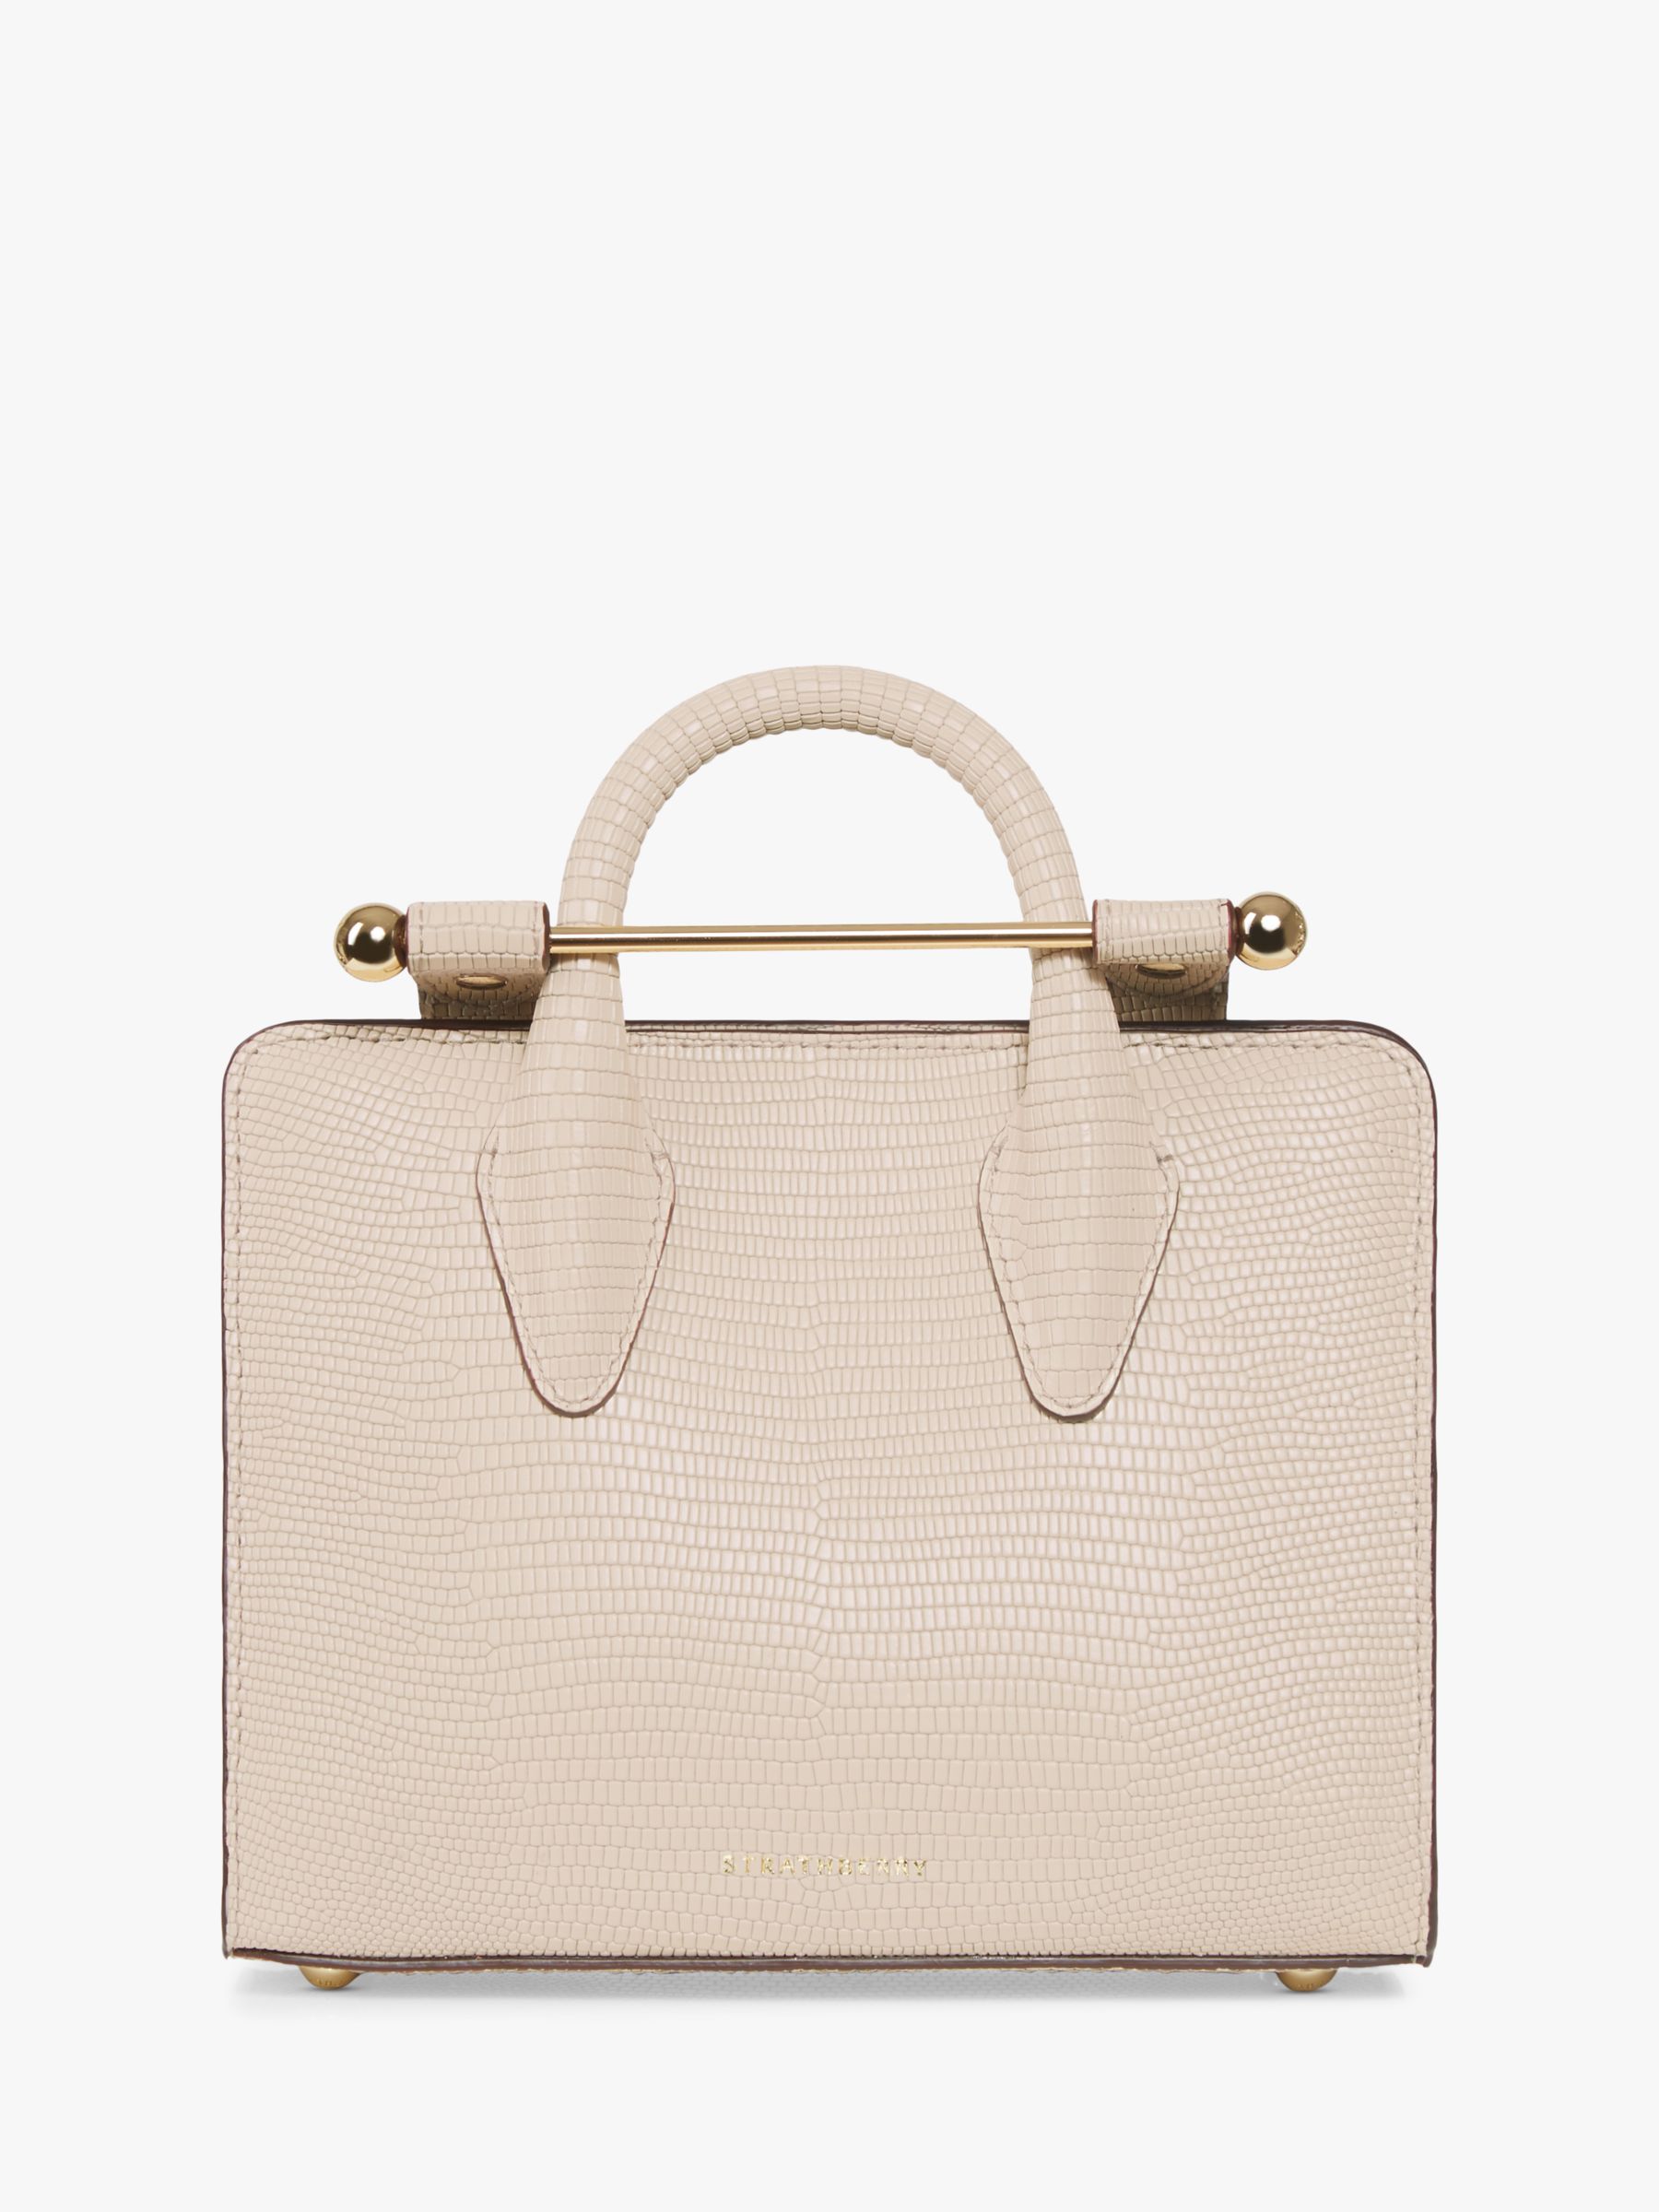 The Strathberry Midi Tote - Top Handle Leather Tote Bag - Cream